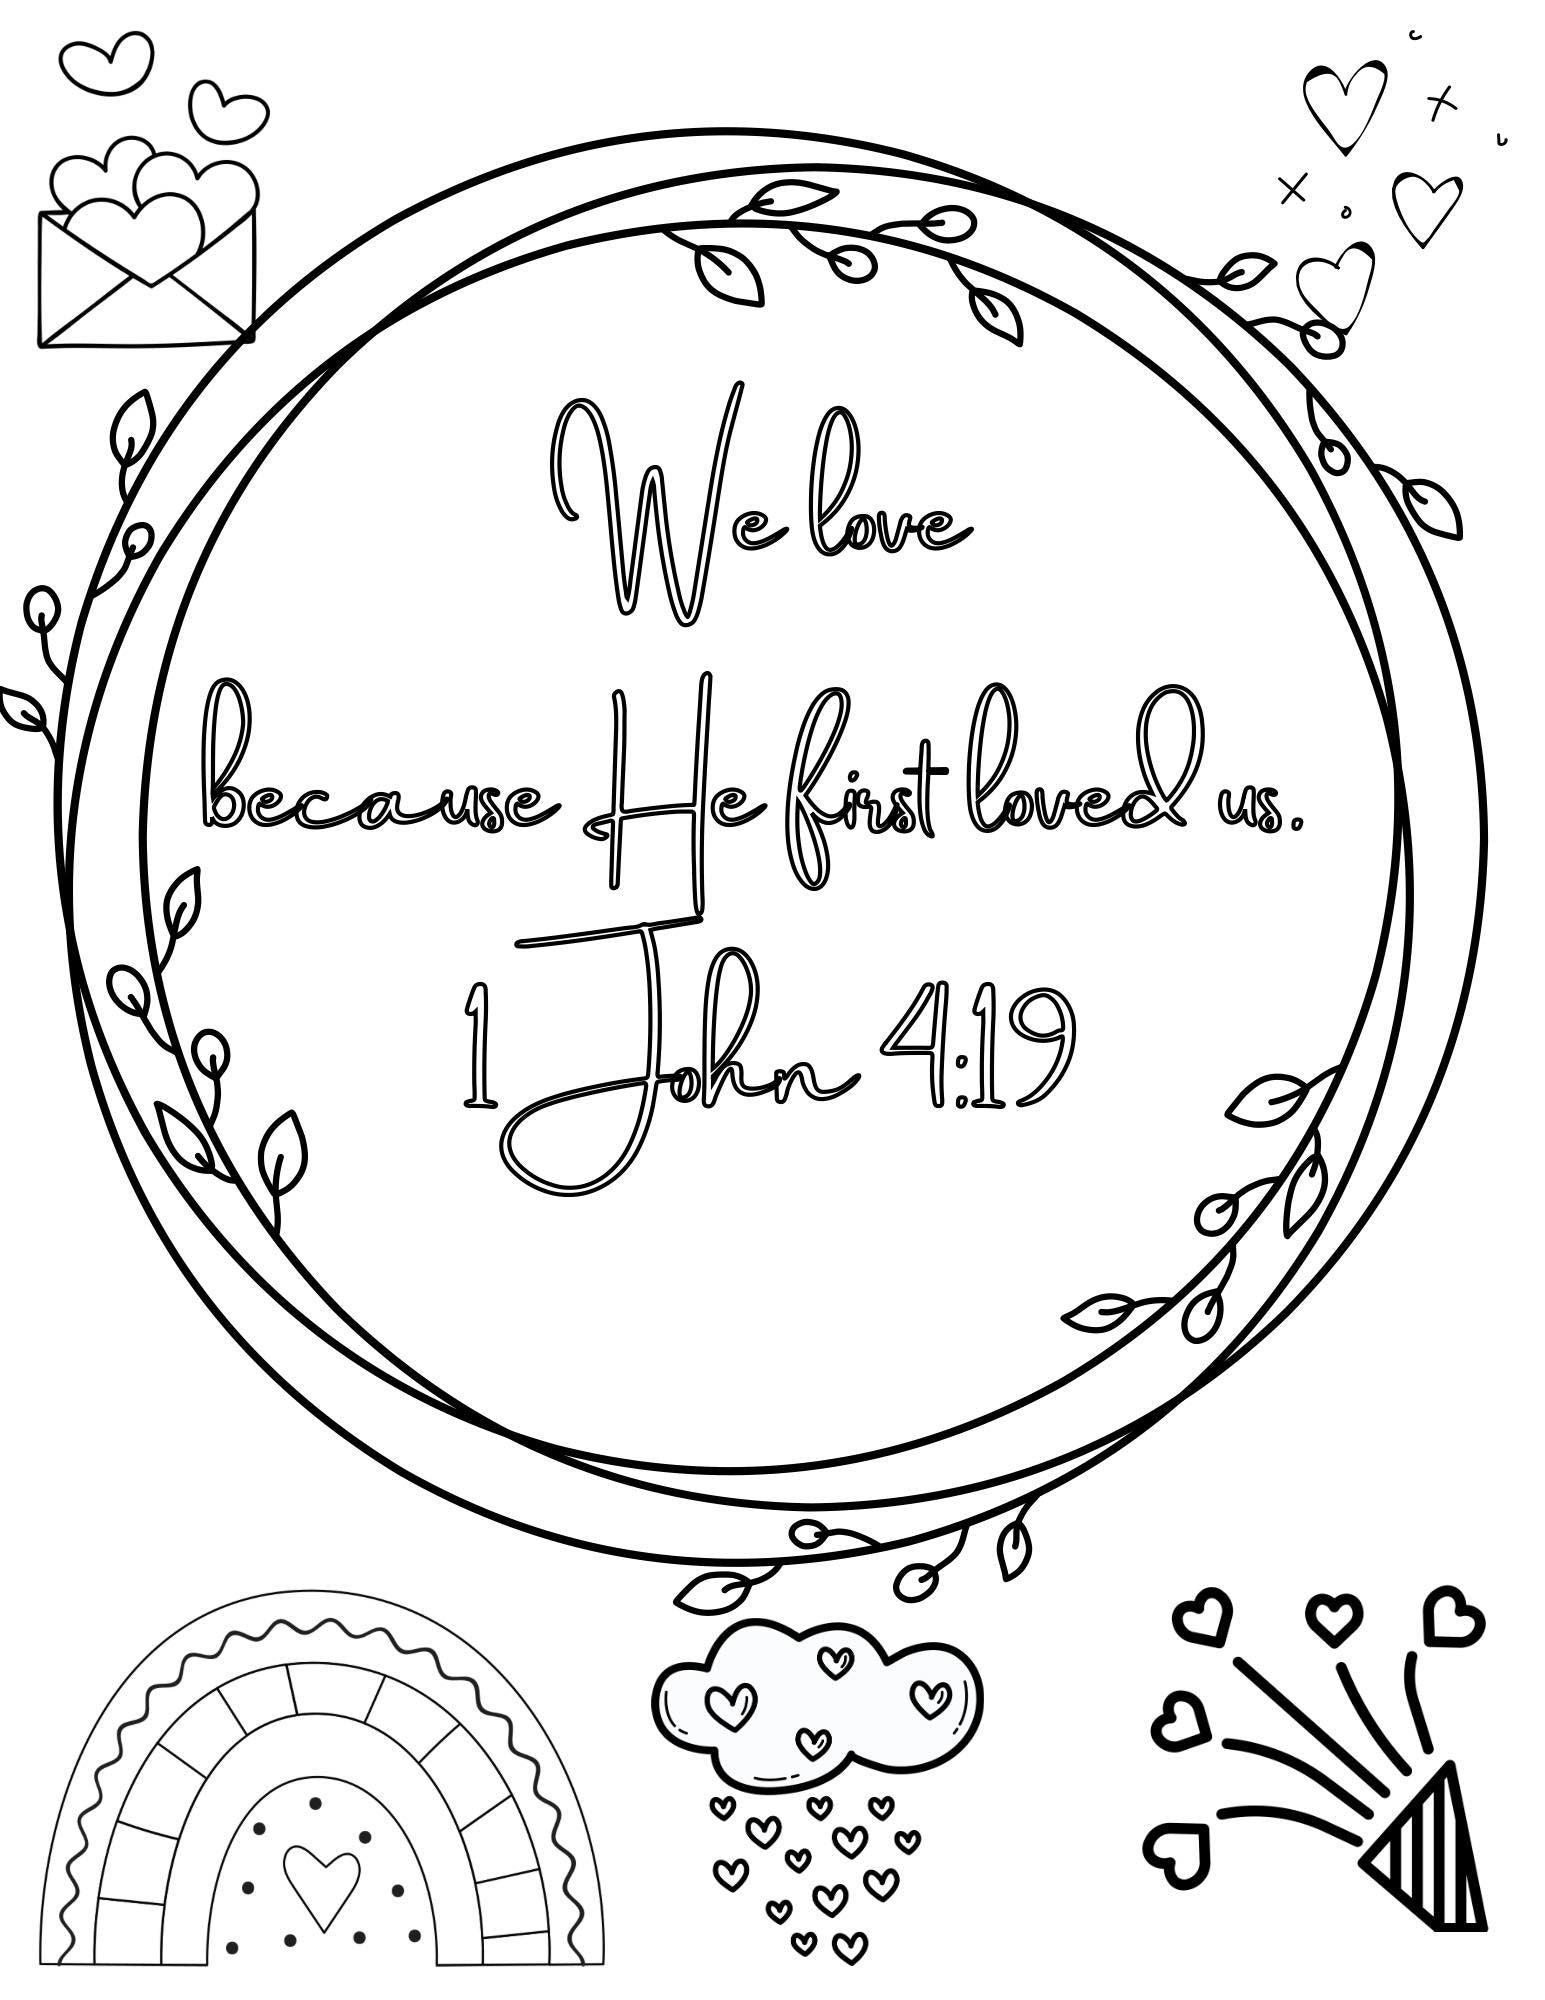 Set of valentines day themed bible verse coloring pages â lavender and maple